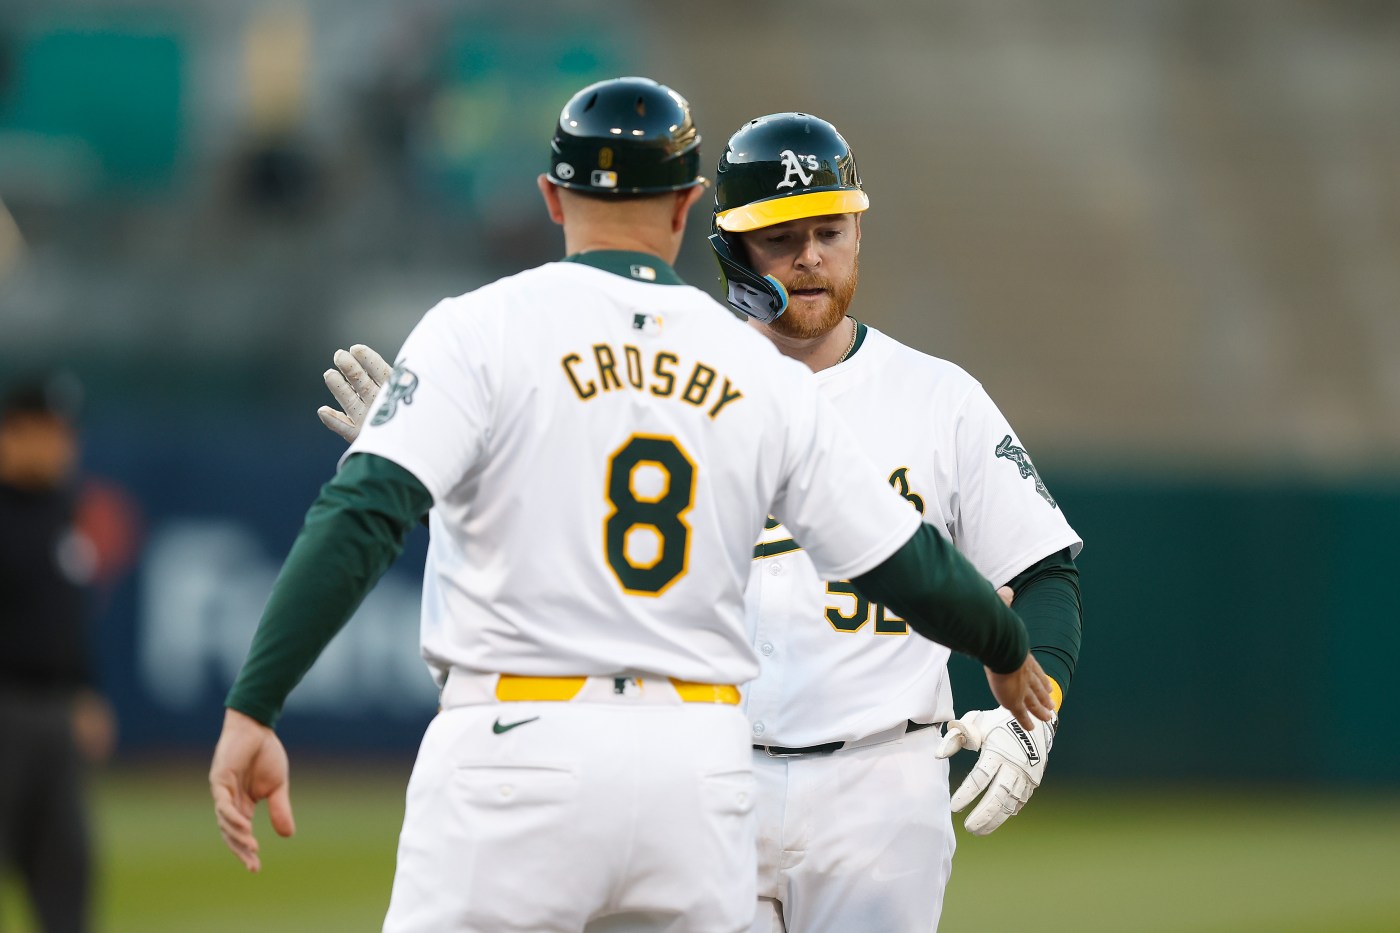 season-low-coliseum-crowd-of-3,296-watch-oakland-a’s-fall-3-2-to-st.-louis-cardinals